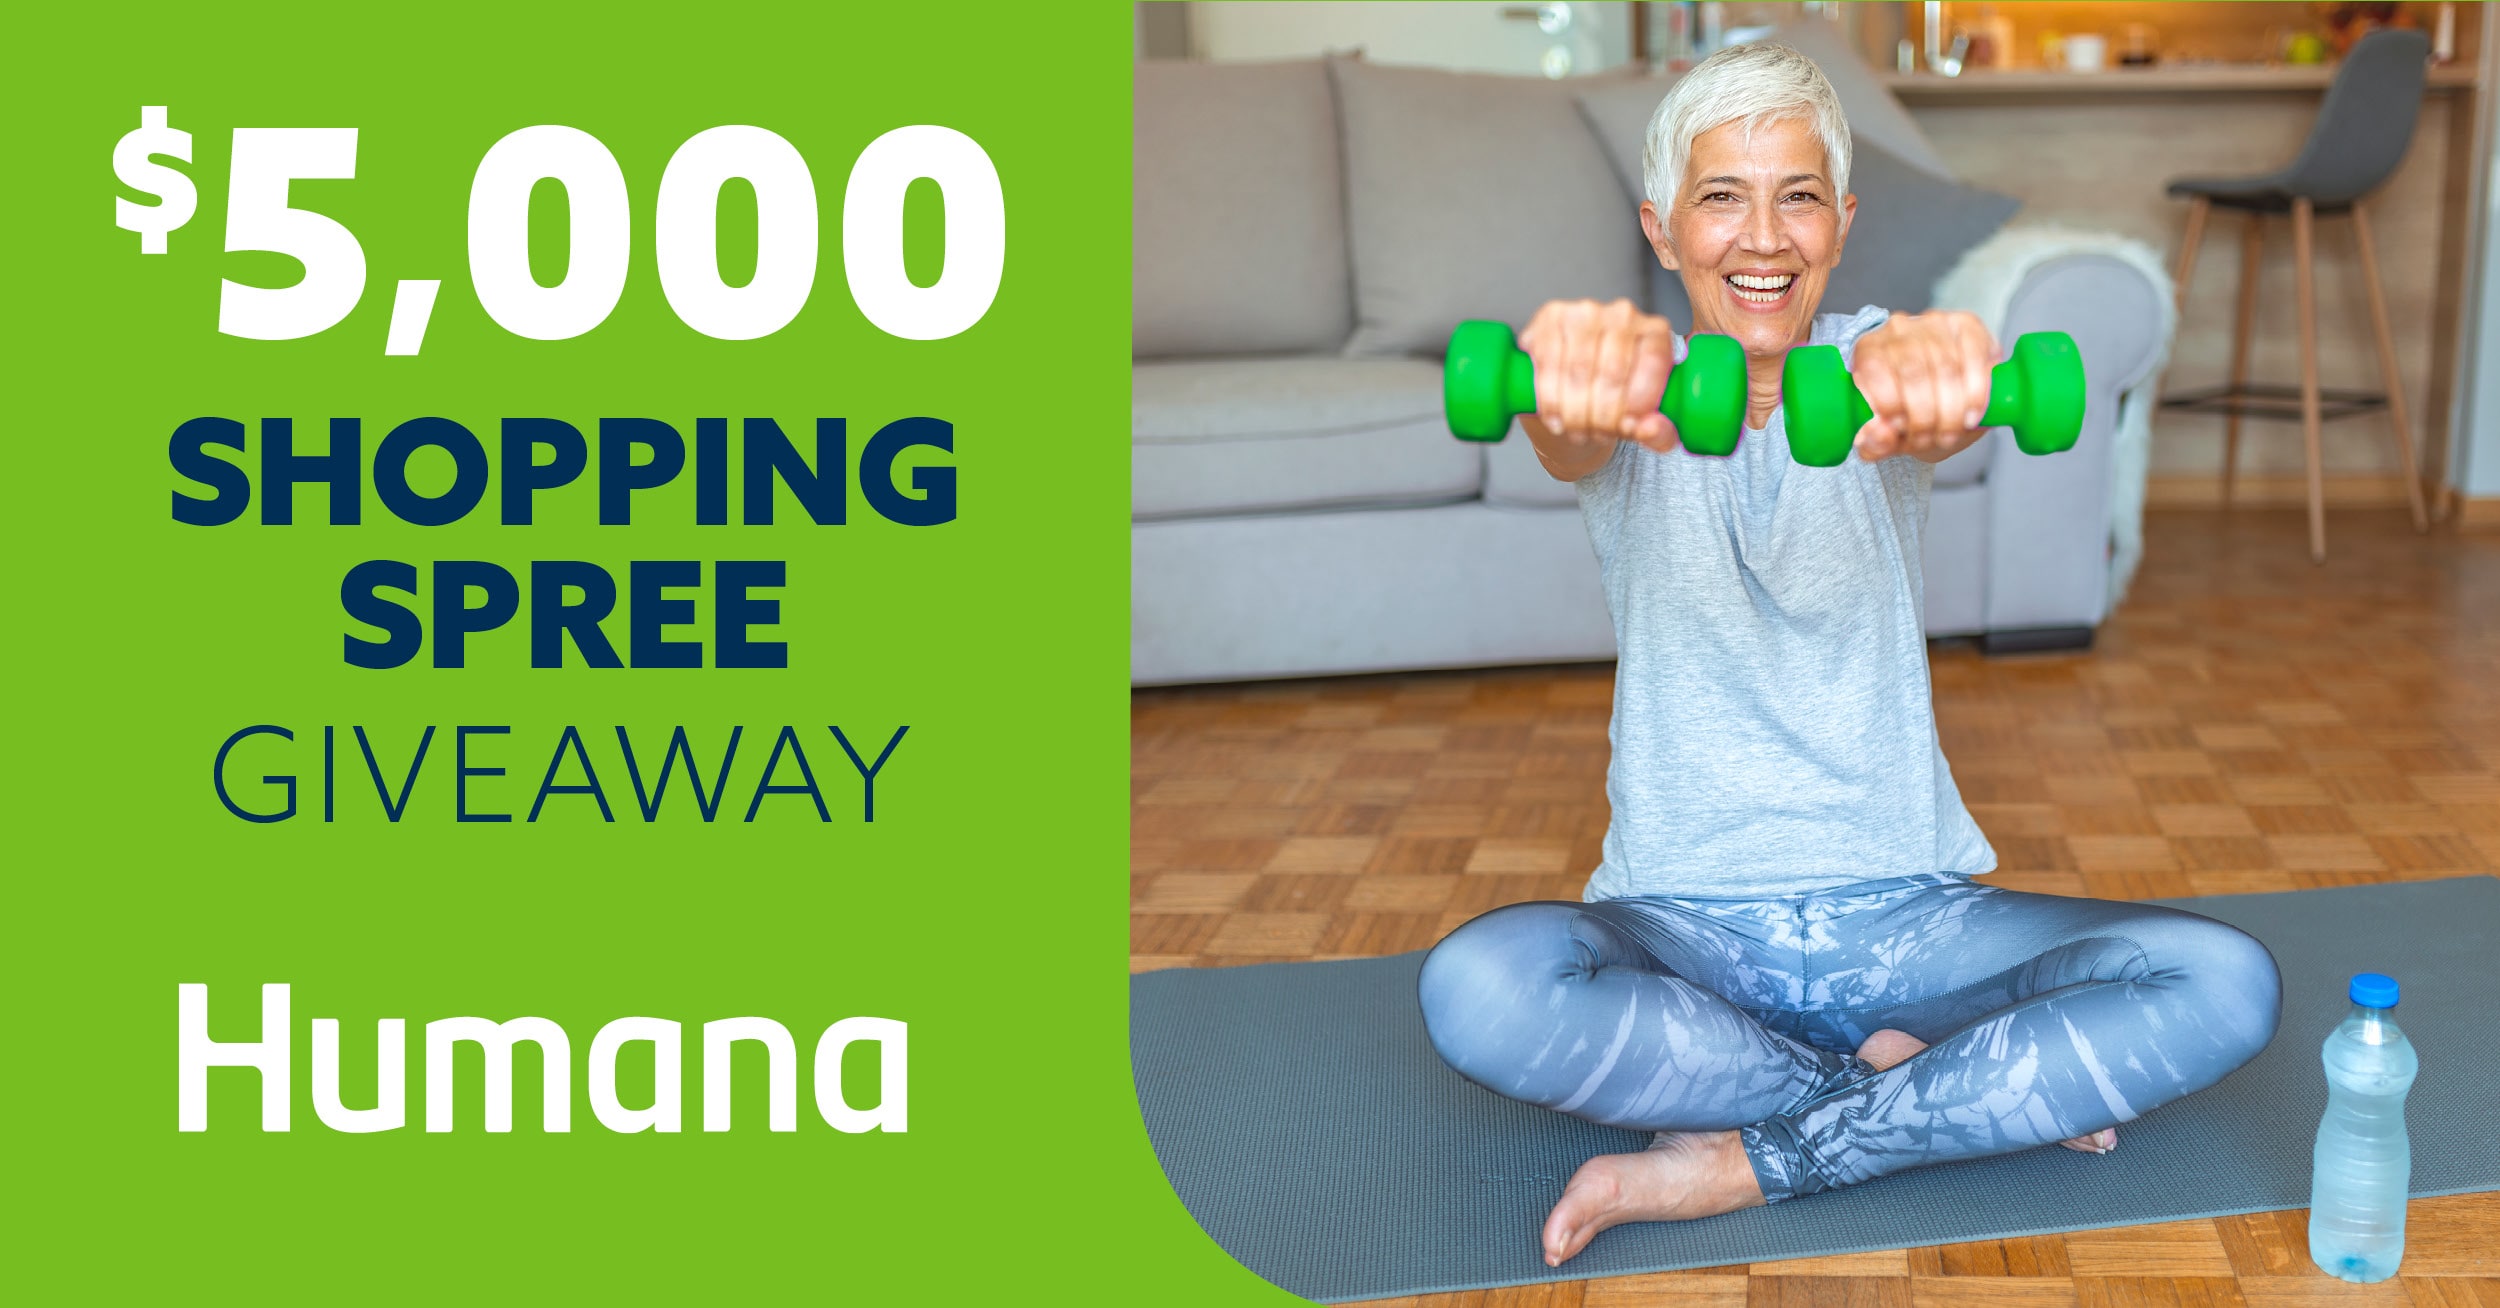 $5,000 Shopping Spree Giveaway